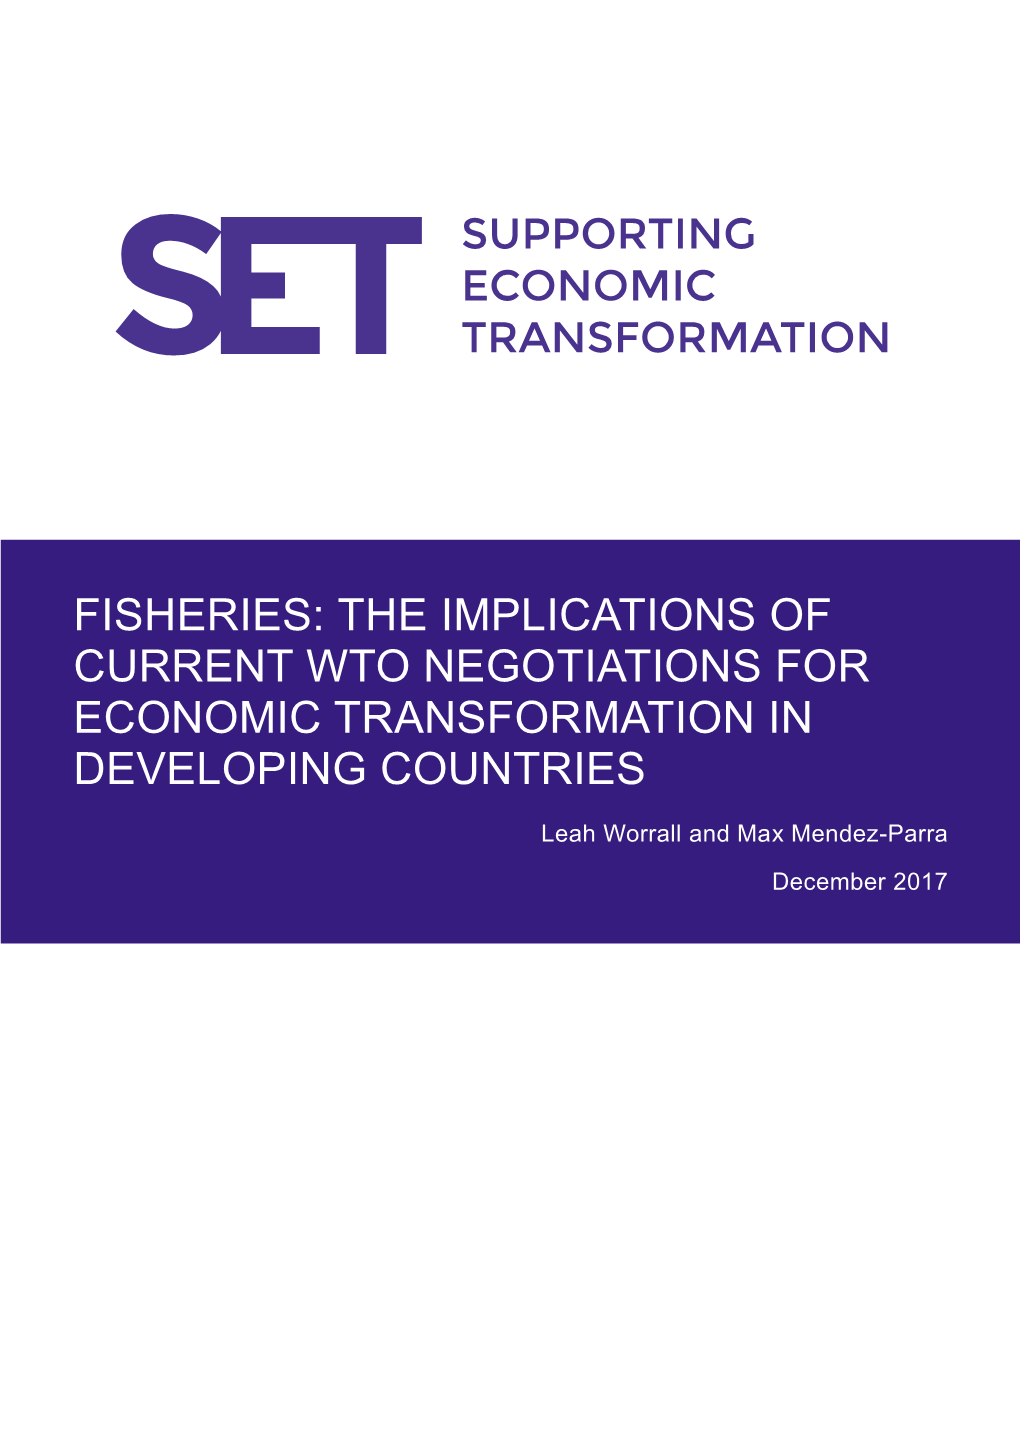 Fisheries: the Implications of Current Wto Negotiations for Economic Transformation in Developing Countries